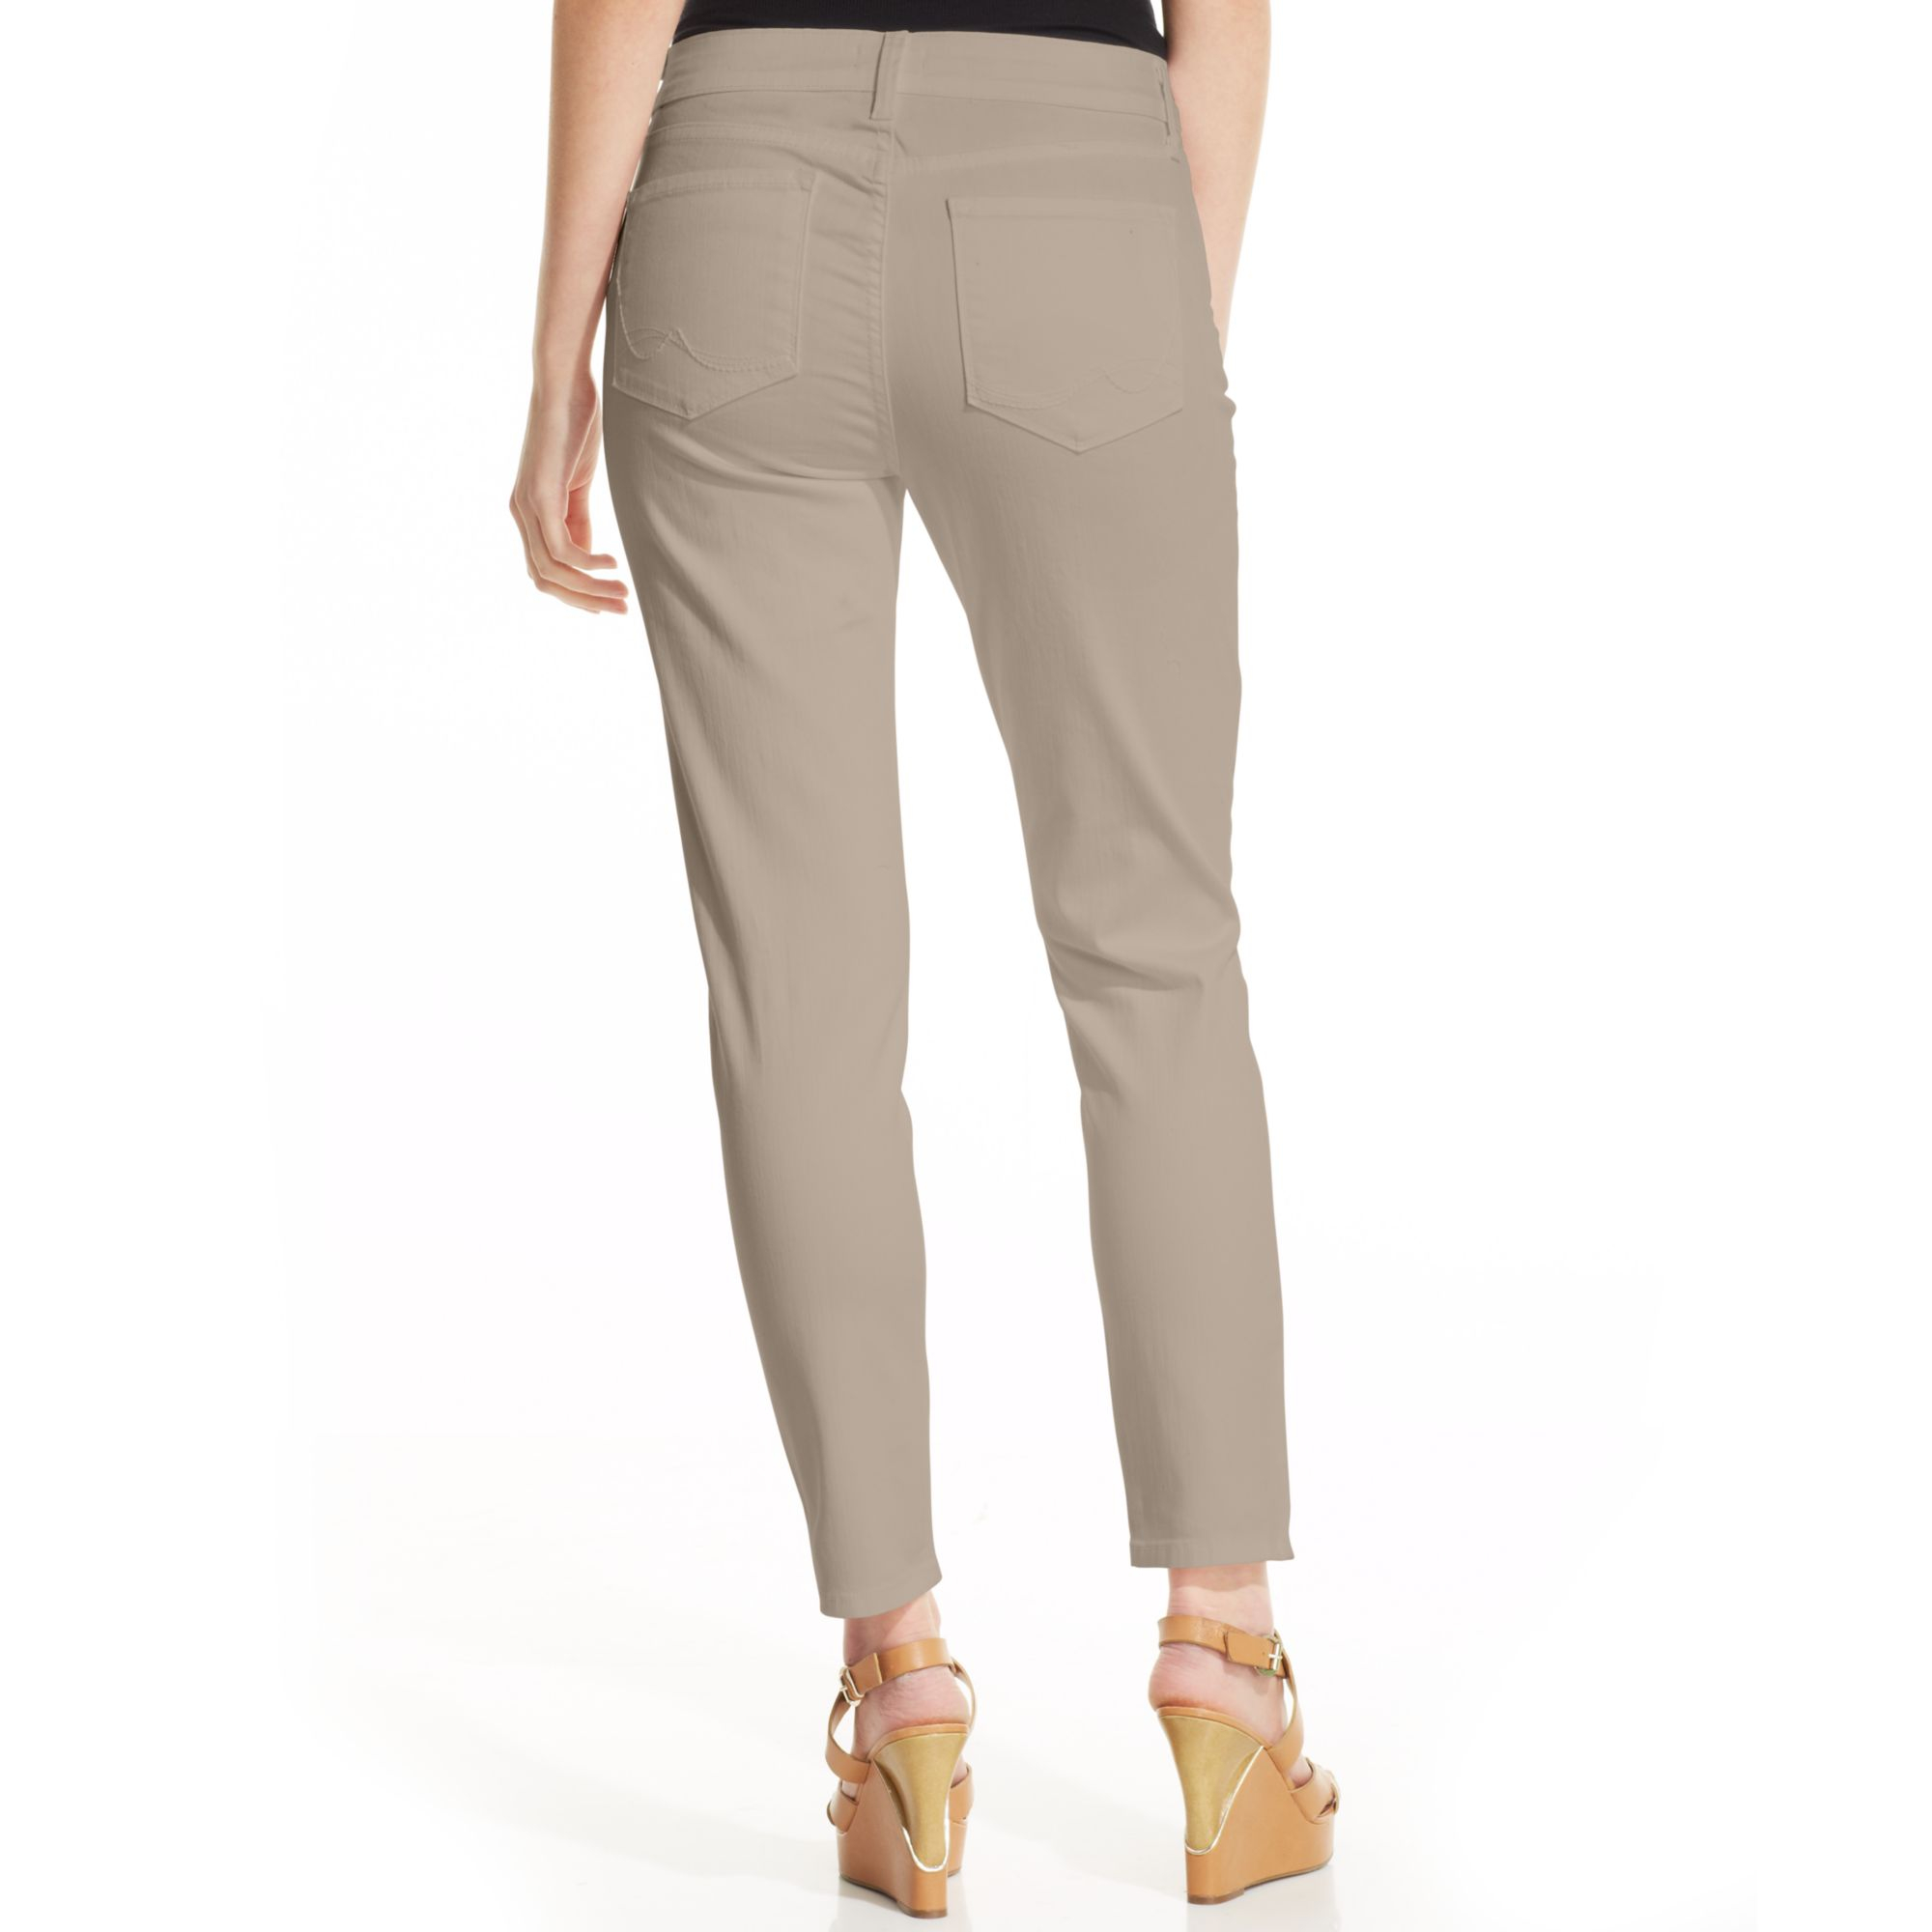 Nydj Petite Clarissa Skinny Colored Jeans in Natural | Lyst